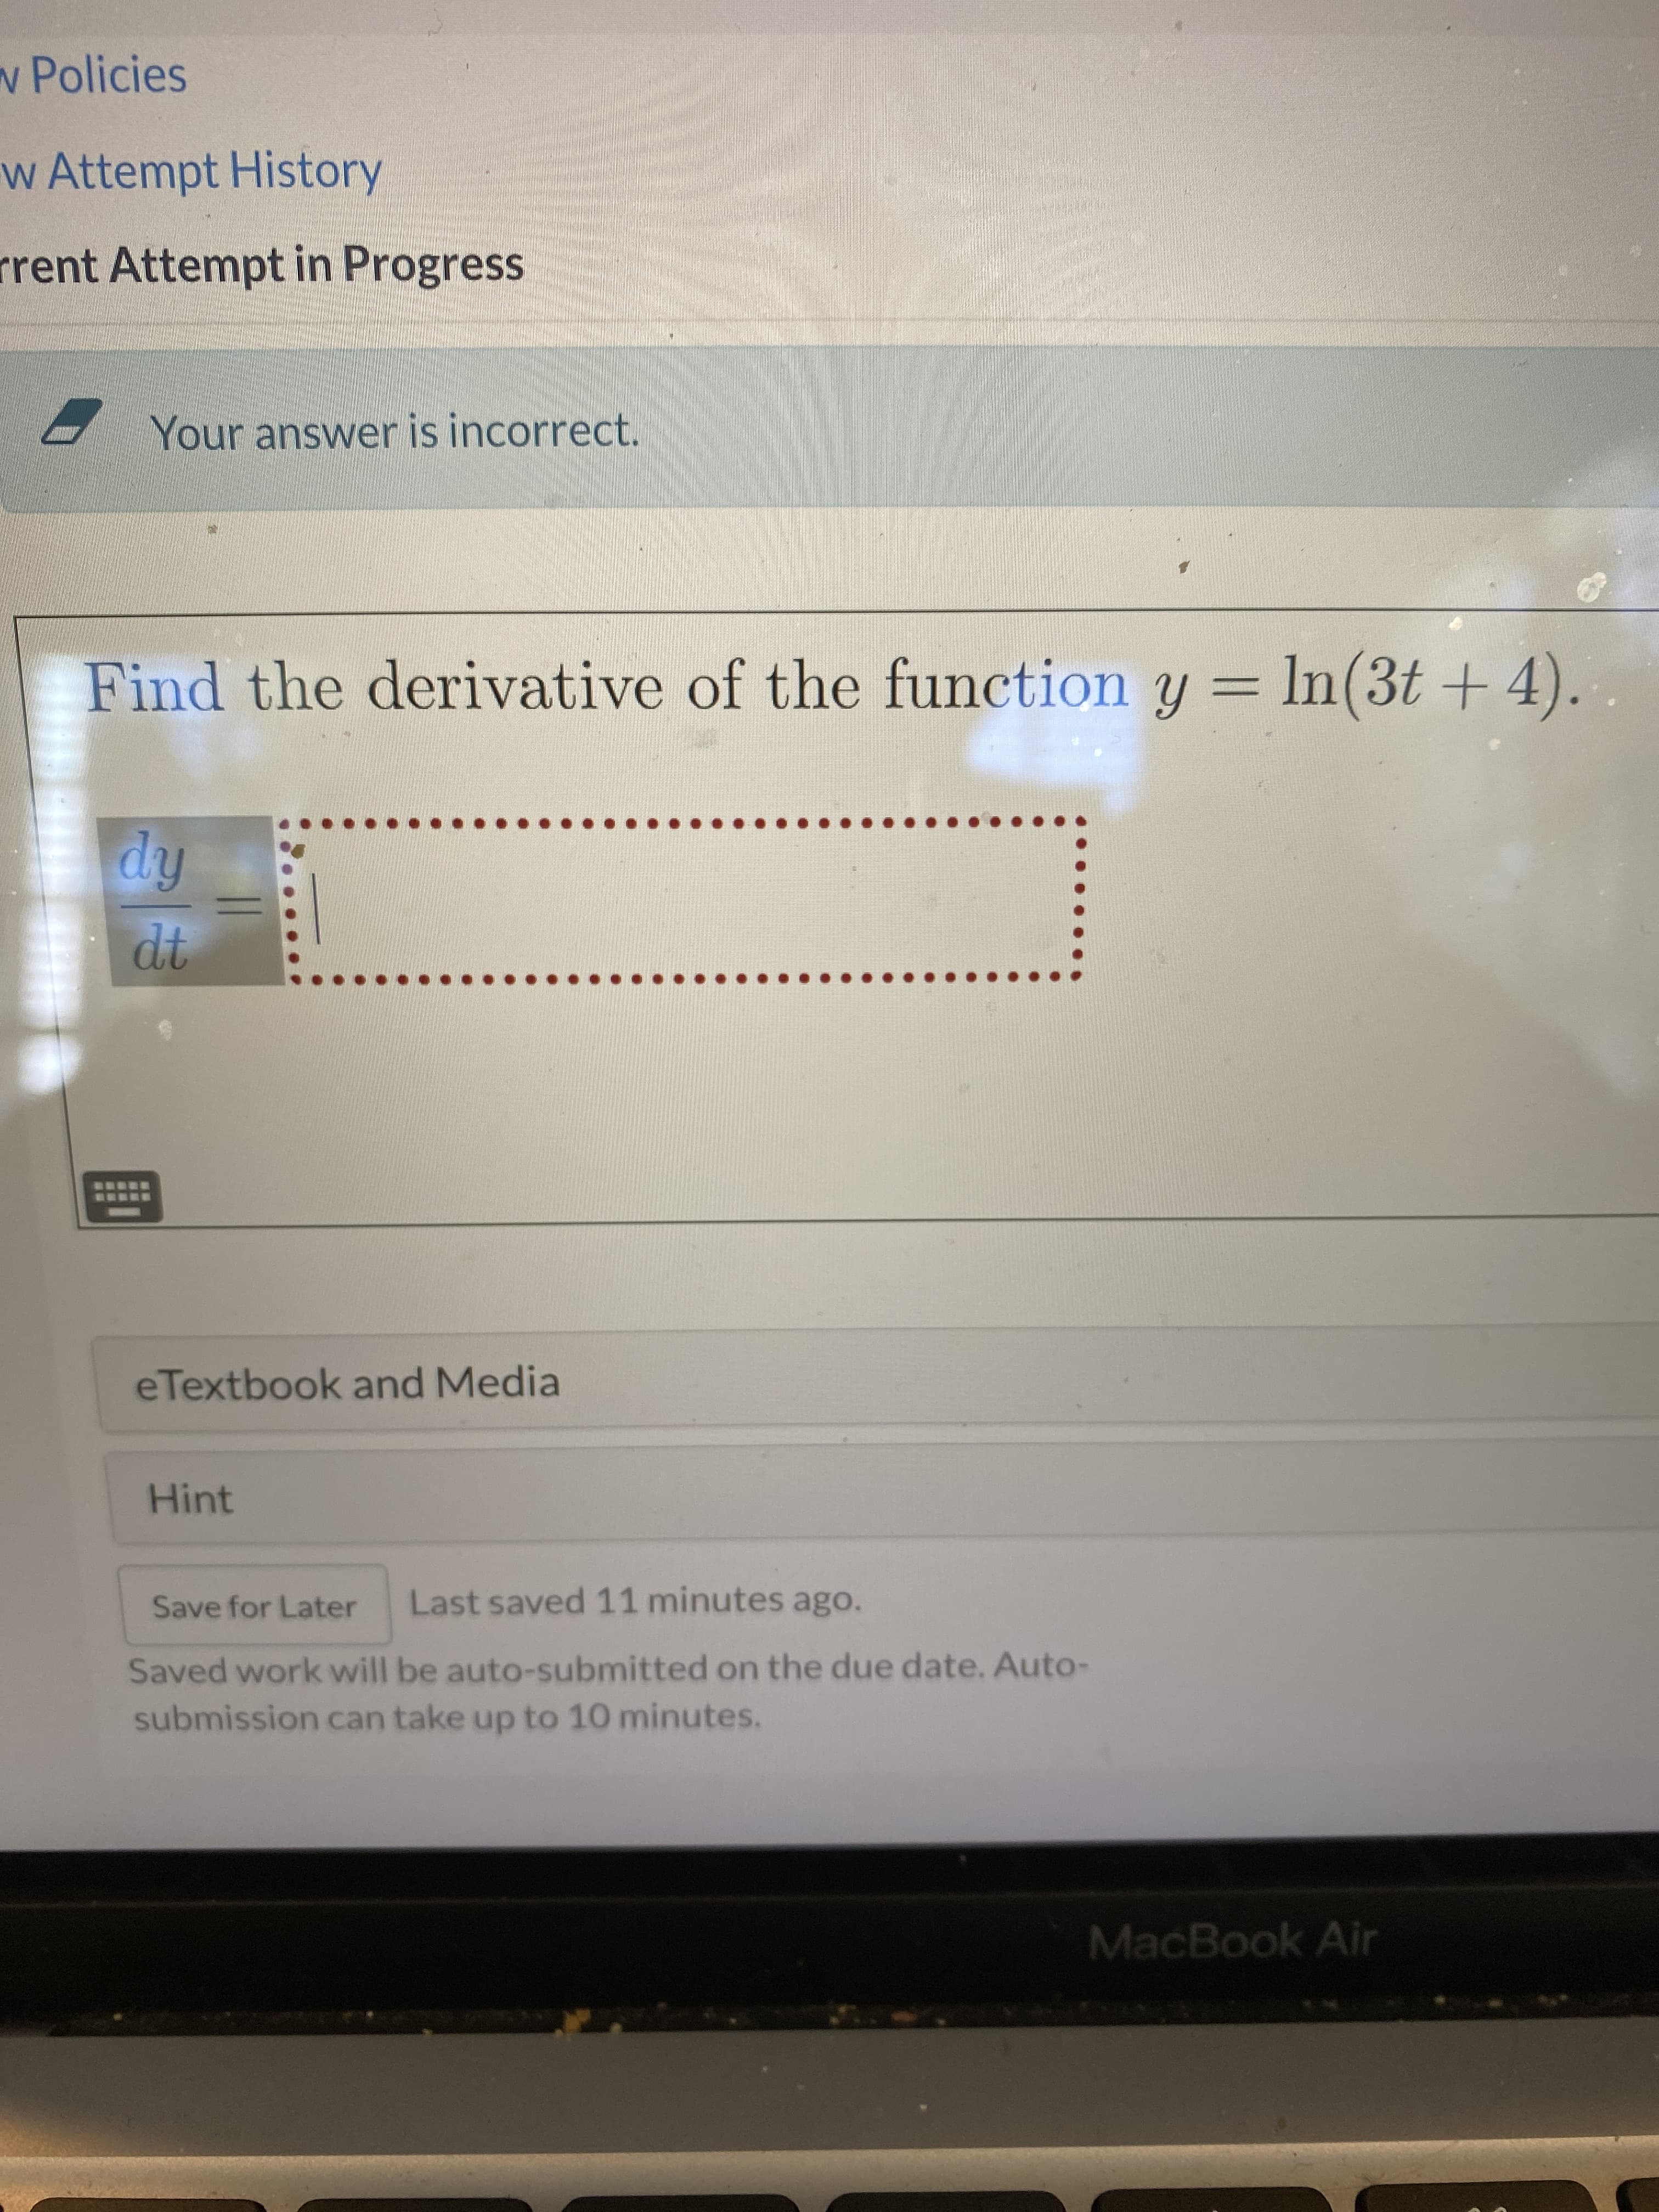 w Policies
w Attempt History
rrent Attempt in Progress
Your answer is incorrect.
Find the derivative of the function y = lIn(3t + 4).
%3D
eTextbook and Media
Hint
Save for Later
Last saved 11 minutes ago.
Saved work will be auto-submitted on the due date. Auto-
submission can take up to 10 minutes.
MacBook Air
